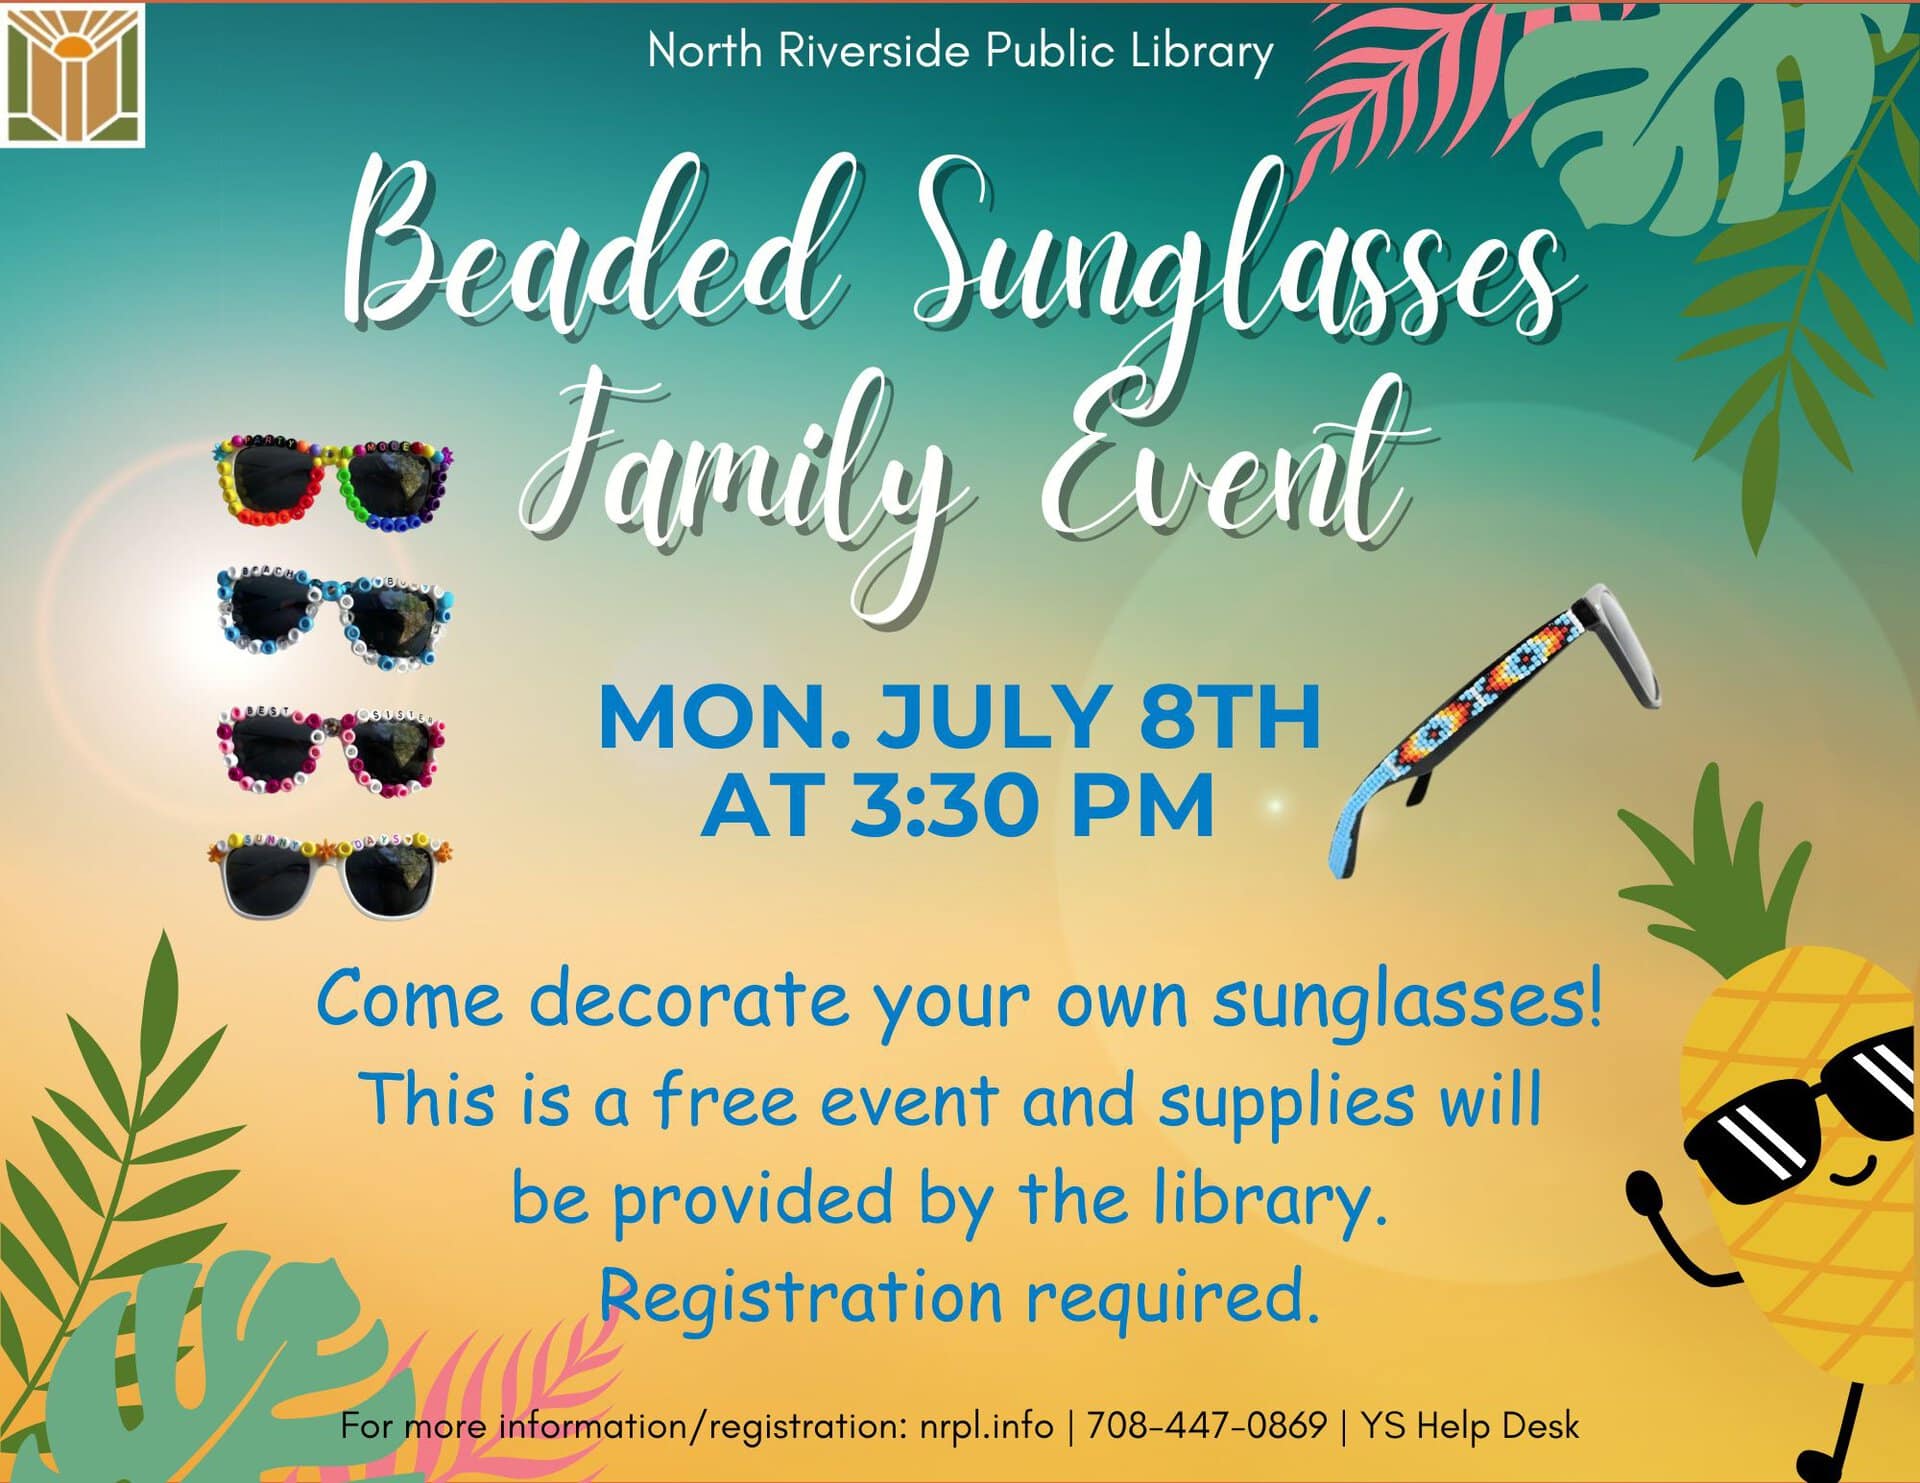 Beaded Sunglasses. Monday, July 8 from 3:30 - 4:30 pm. Come decorate your own sunglasses for the summer! All ages with an adult.